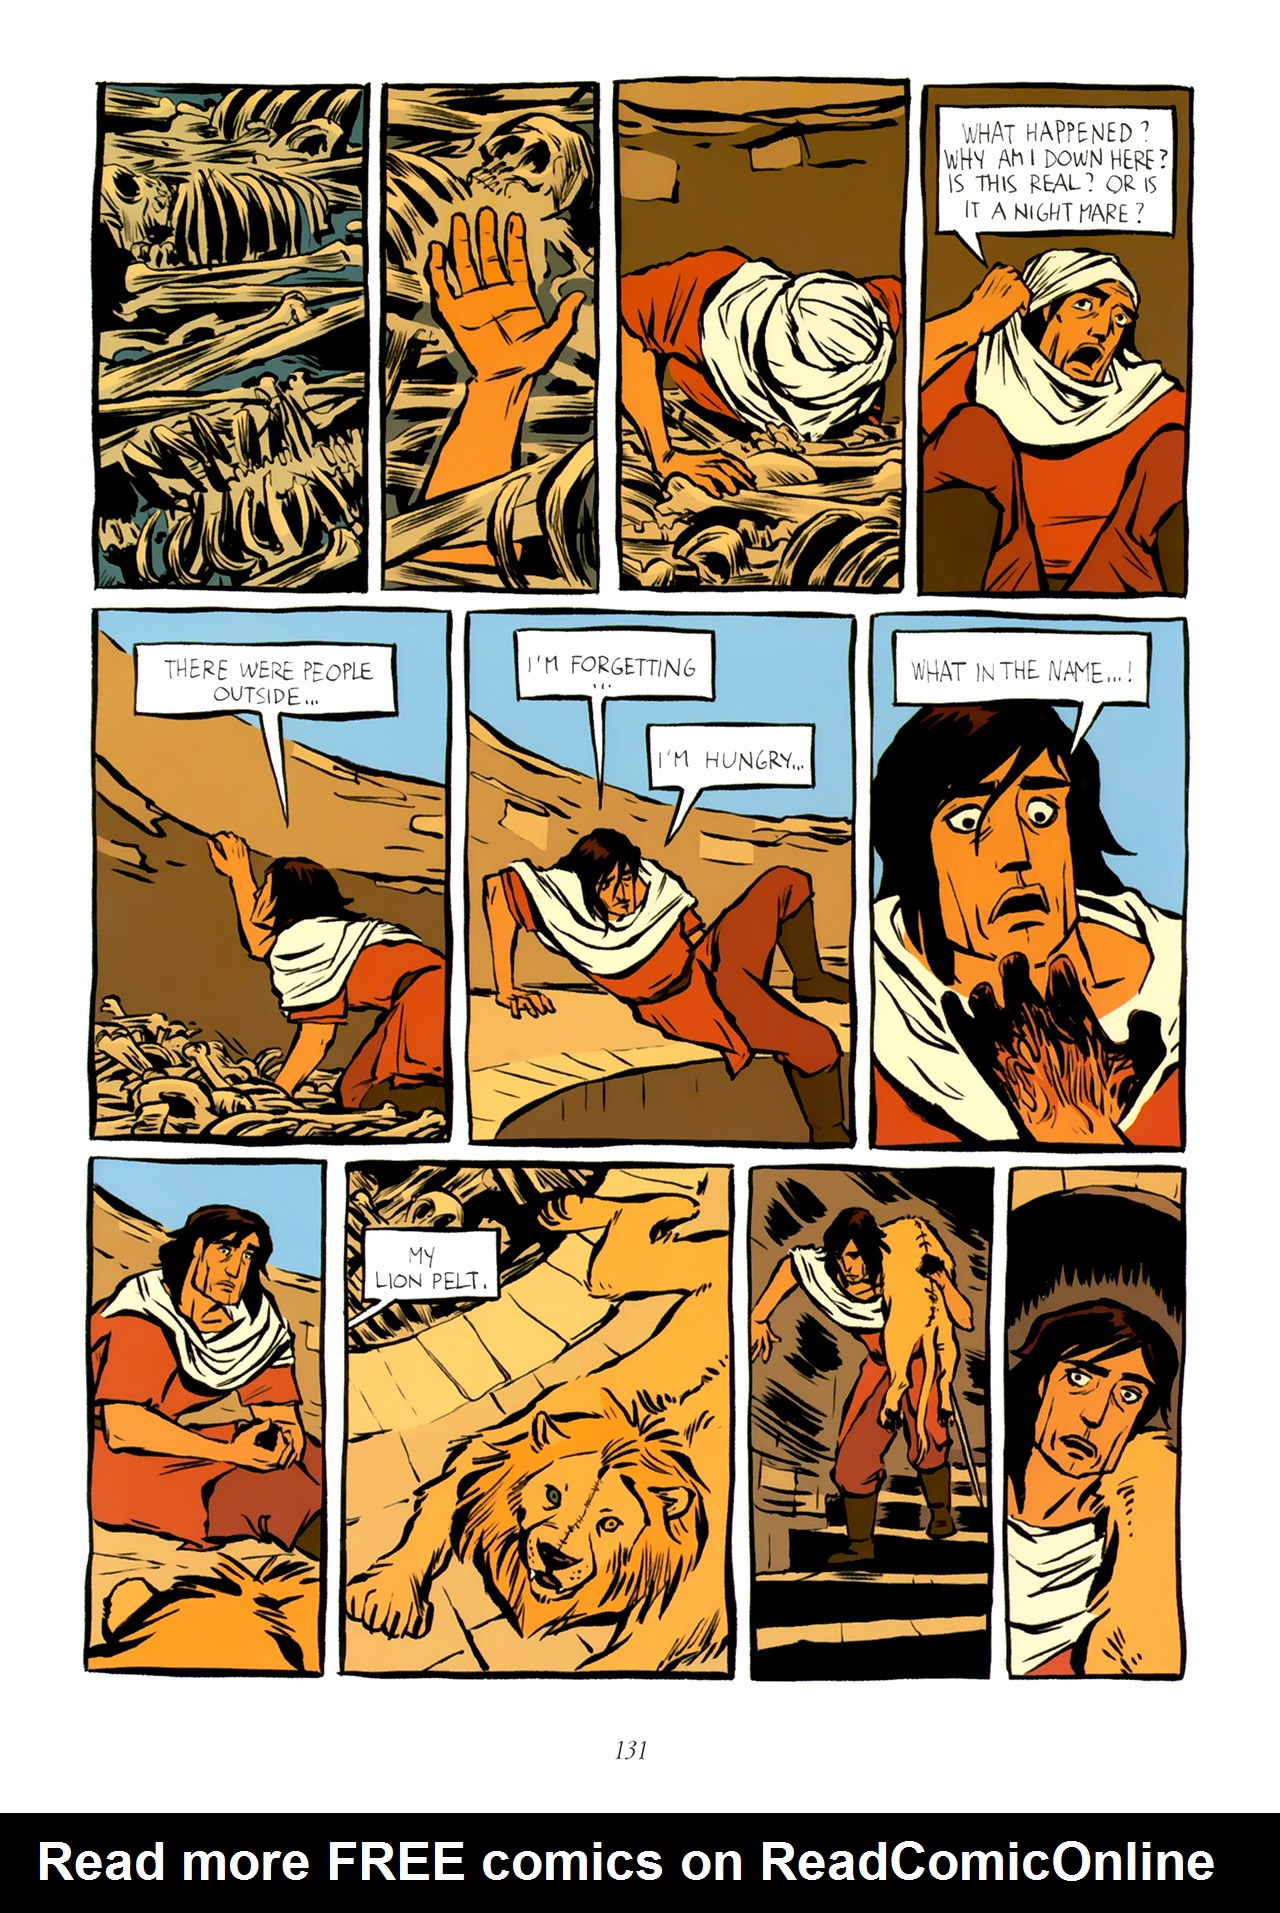 Read online Prince of Persia comic -  Issue # TPB - 133